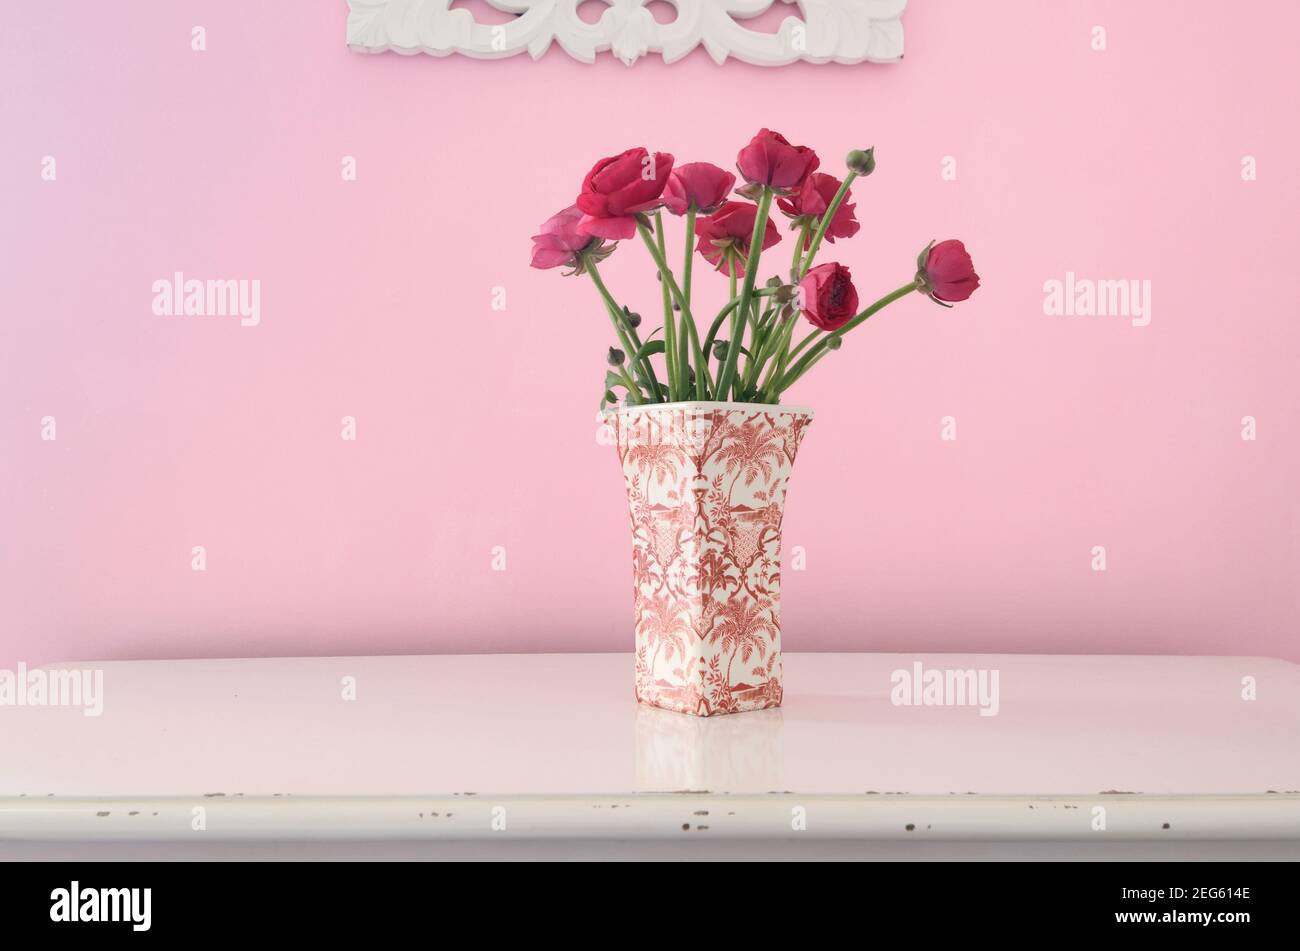 Still Life of Red Roses in Pink & White Vase Set Against Pink Background Stock Photo